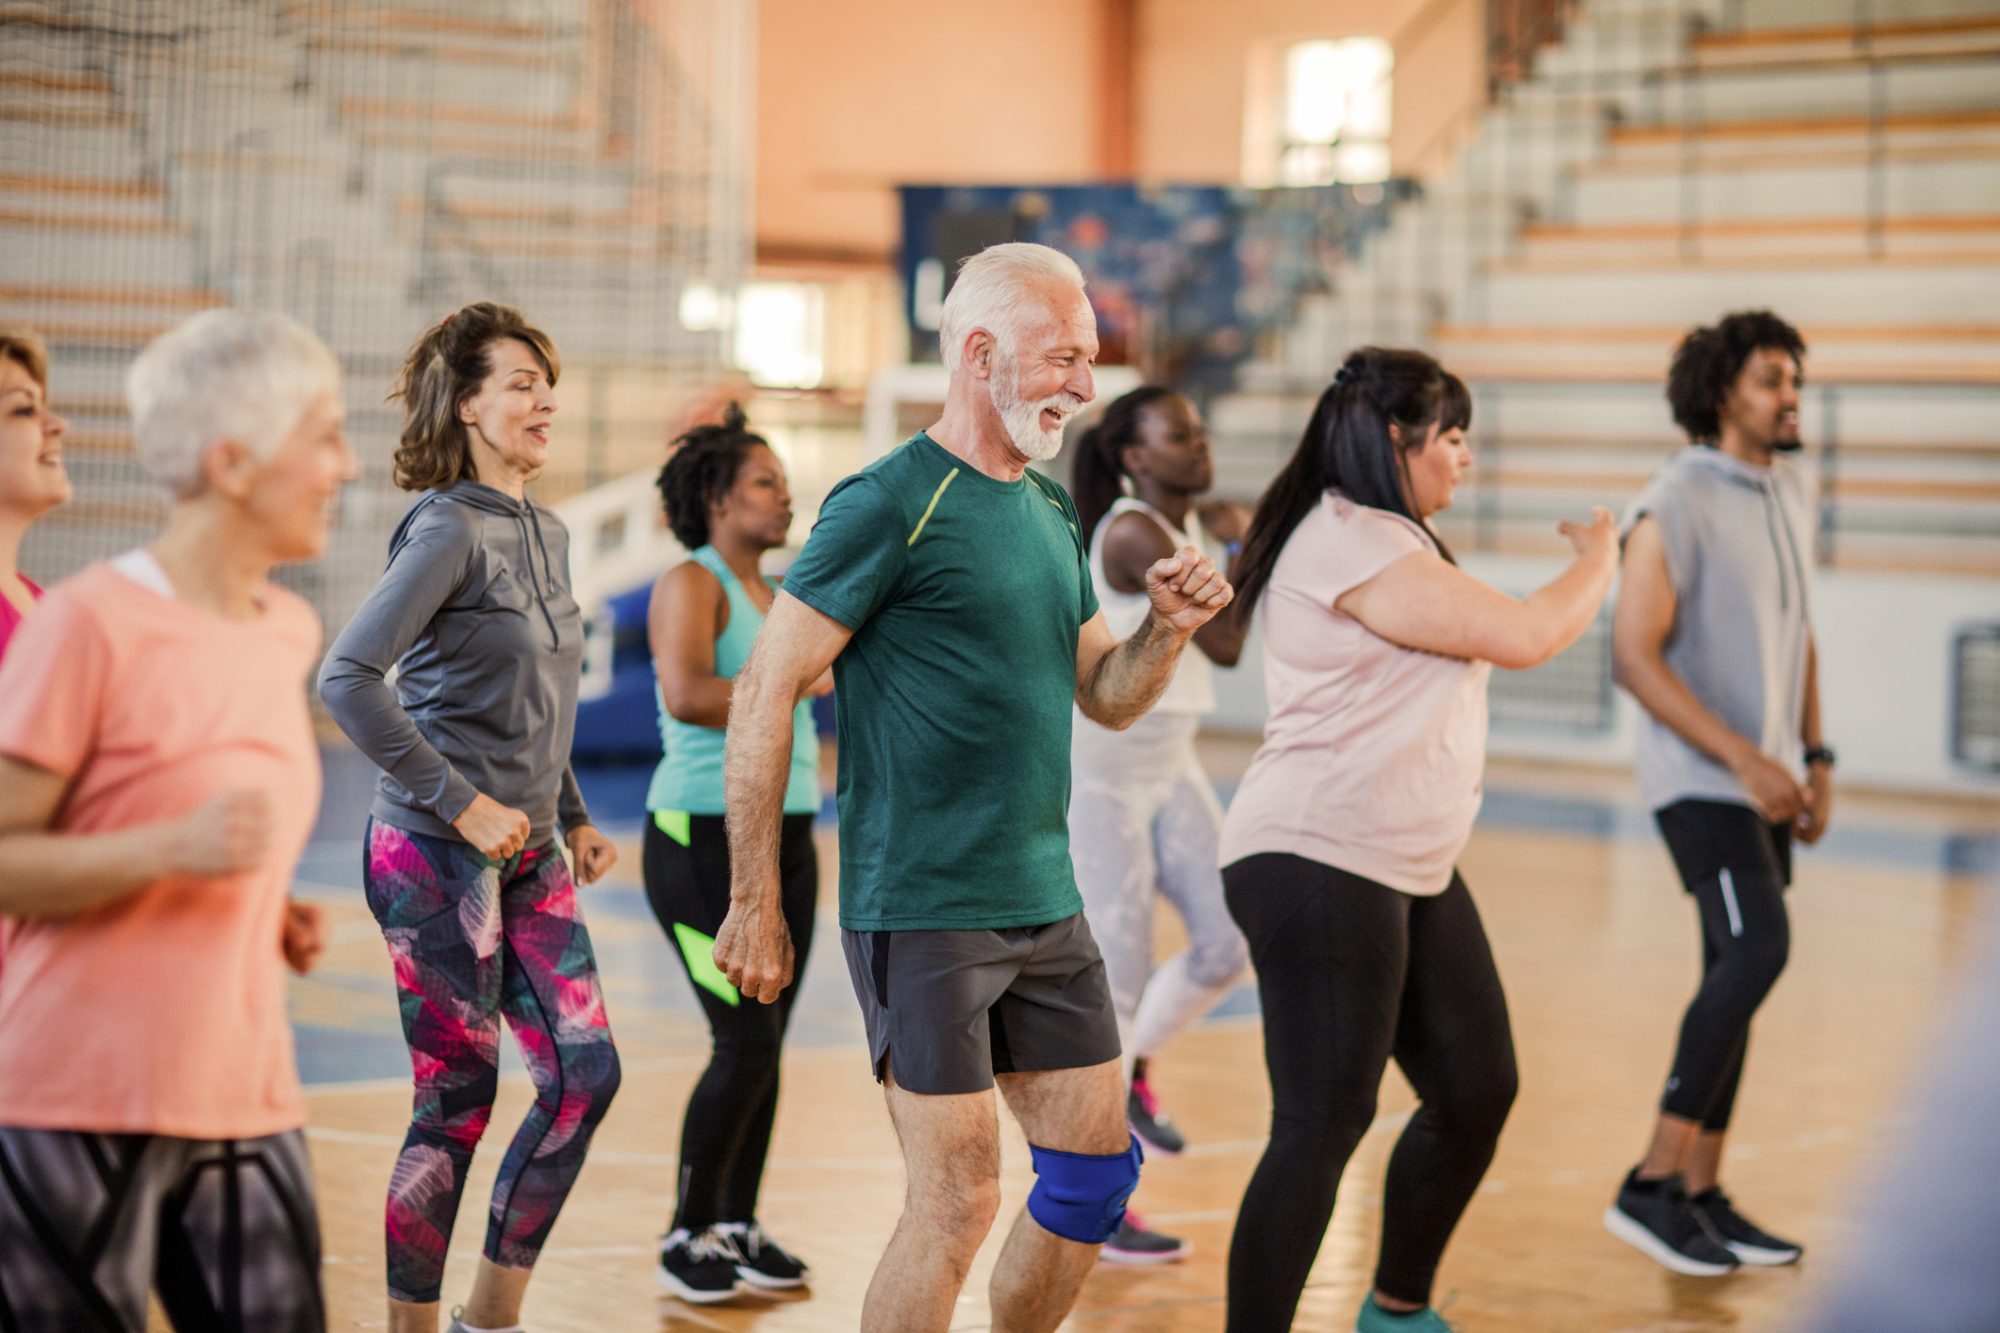 Large group of people dancing at Zumba class